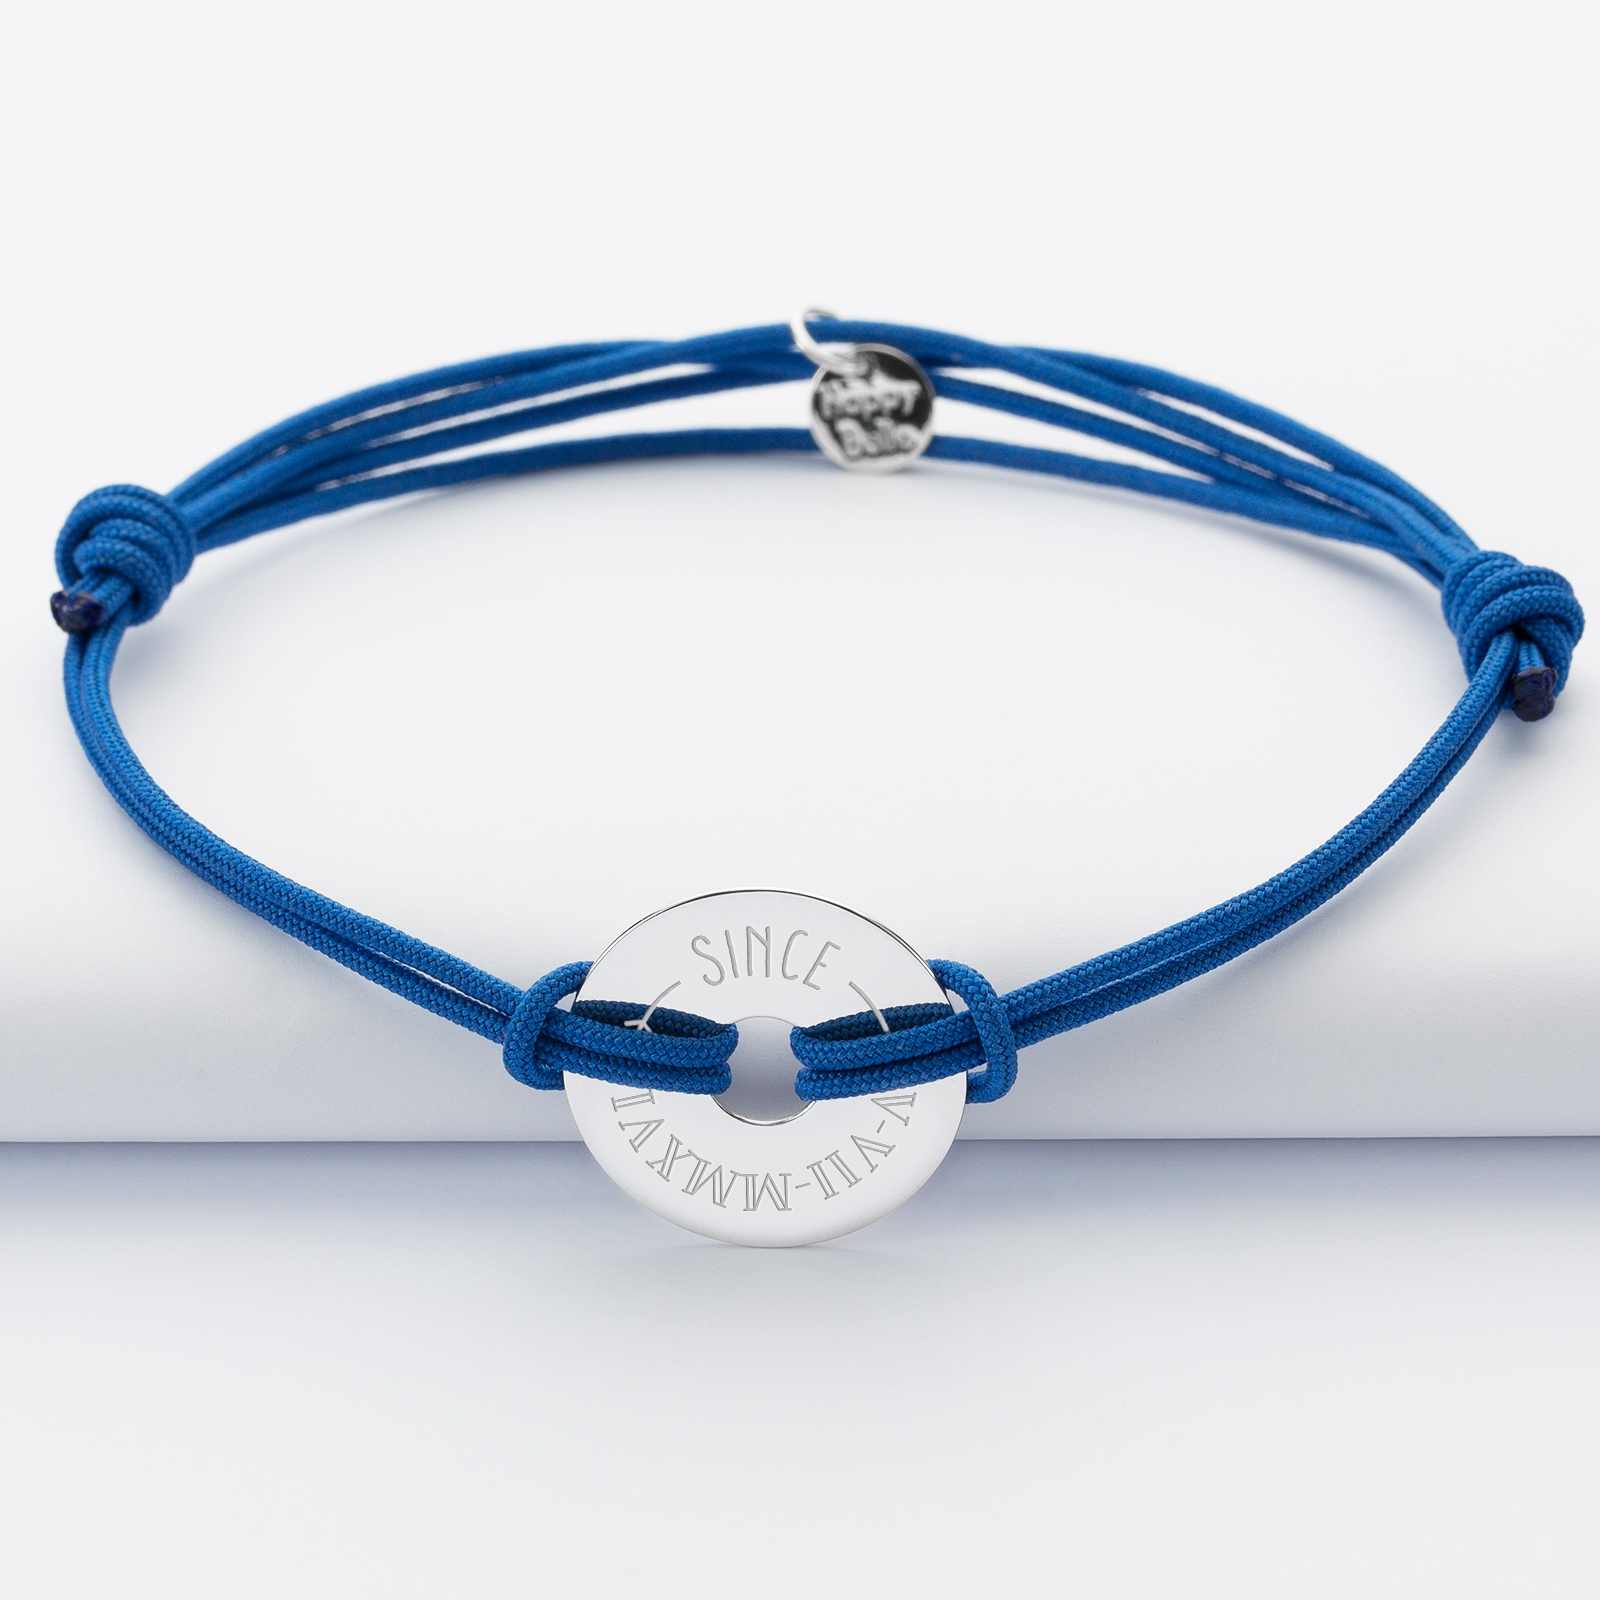 Men's double cord bracelet with personalised engraved target silver medallion 20mm - "love since" special edition